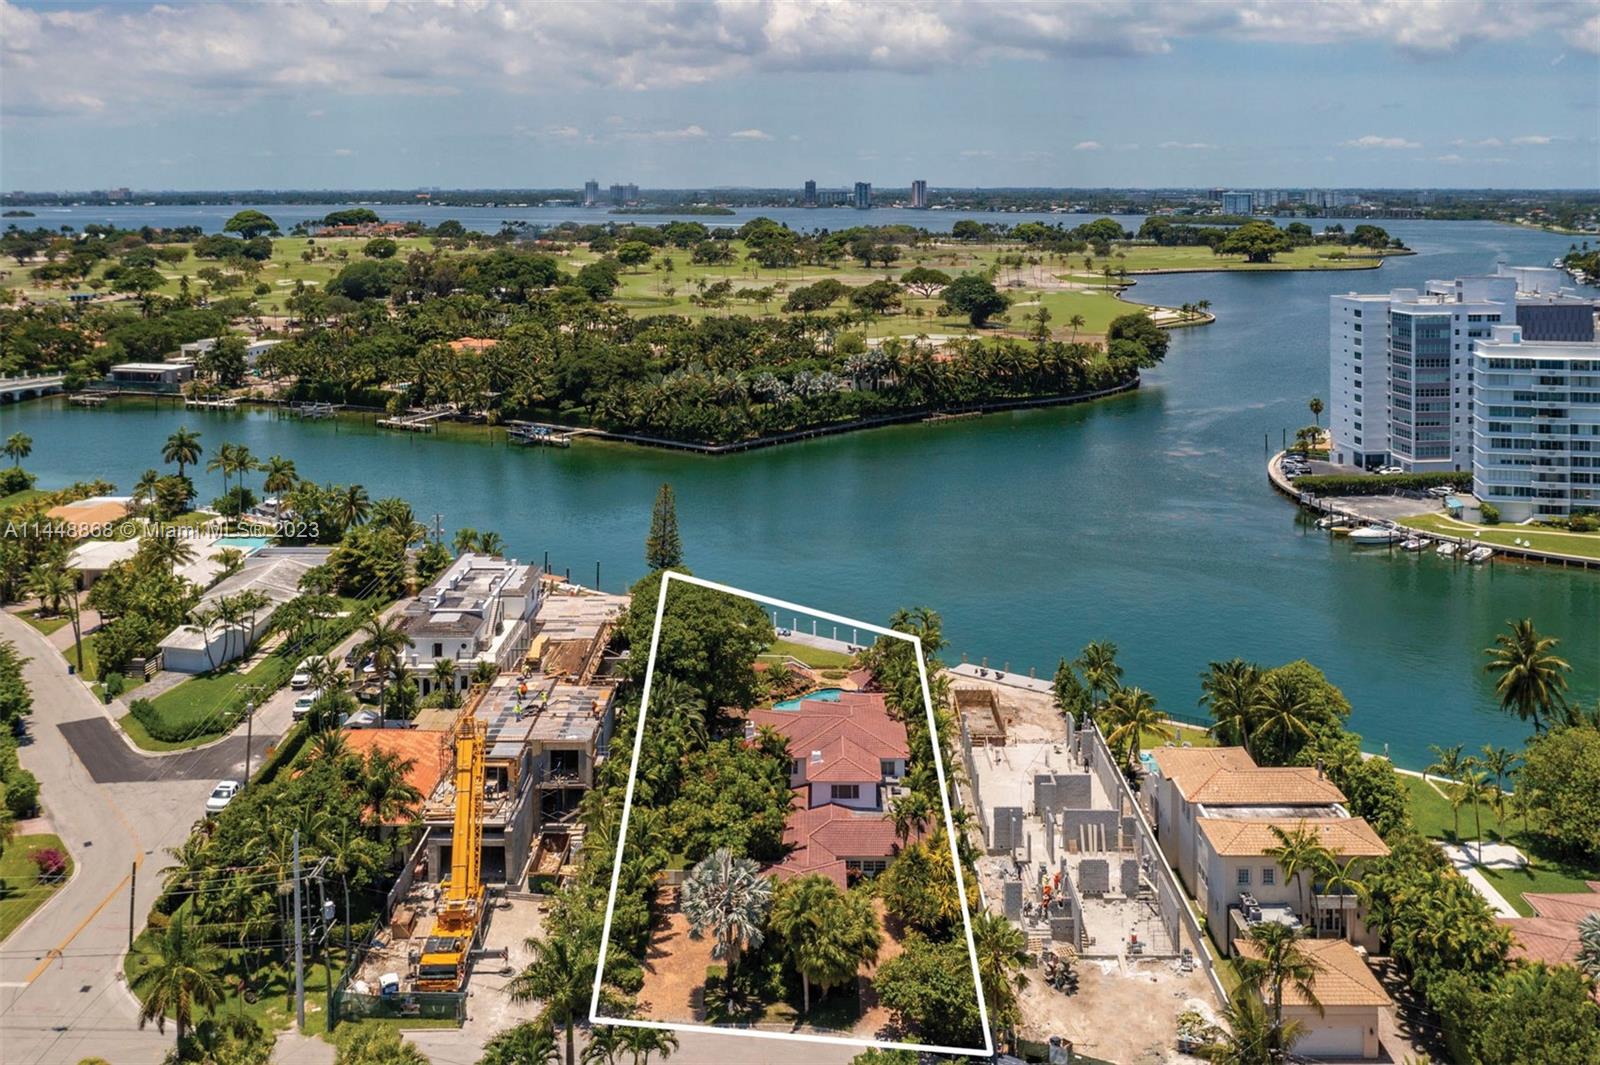 Live in coveted Surfside on this gorgeous waterfront oversized lot overlooking Indian Creek. This extraordinary property boasts an expansive 27,126 square foot lot, offering the ultimate canvas for your dream home, boasting an impressive 123 feet of pristine waterfront. Seize this rare opportunity to secure the largest waterfront lot in all Surfside, ensuring you have ample space to craft your perfect waterfront oasis. Experience the convenience of being mere moments away from the renowned Bal Harbour Shops, exquisite dining, world-class shopping, and the stunning beaches that grace this remarkable community. Welcome to a life of luxury and tranquility on the water's edge.